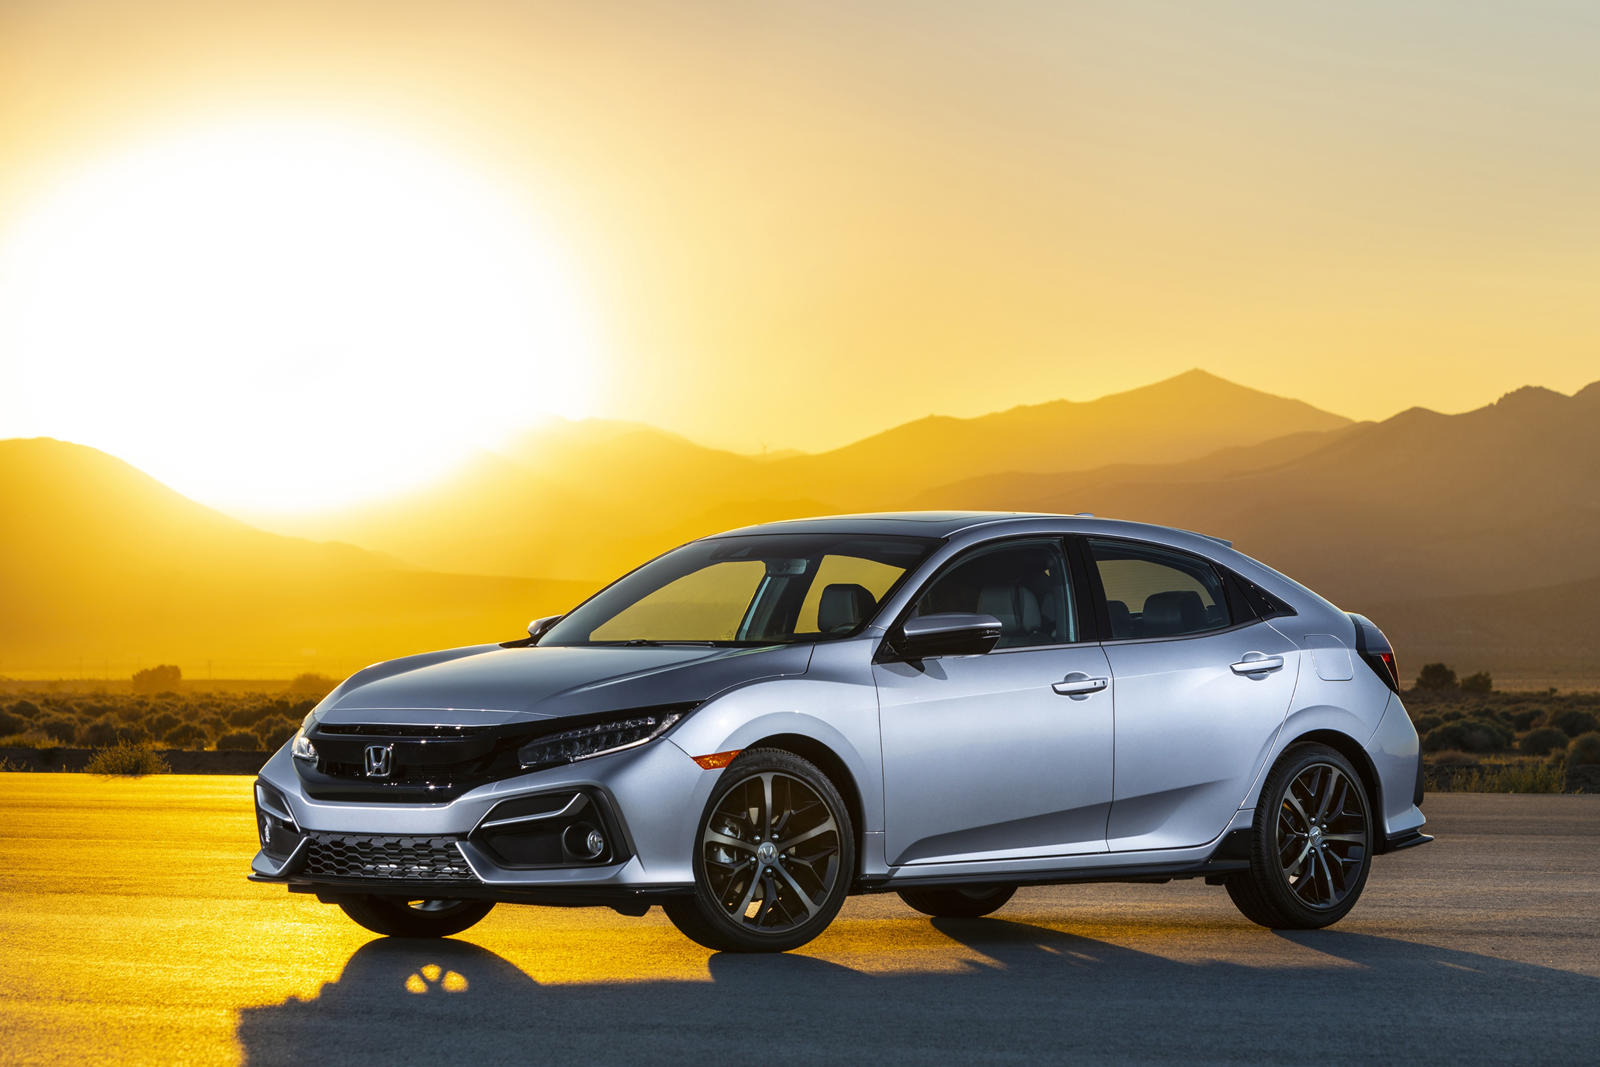 2020 Honda Civic Review, Pricing, and Specs